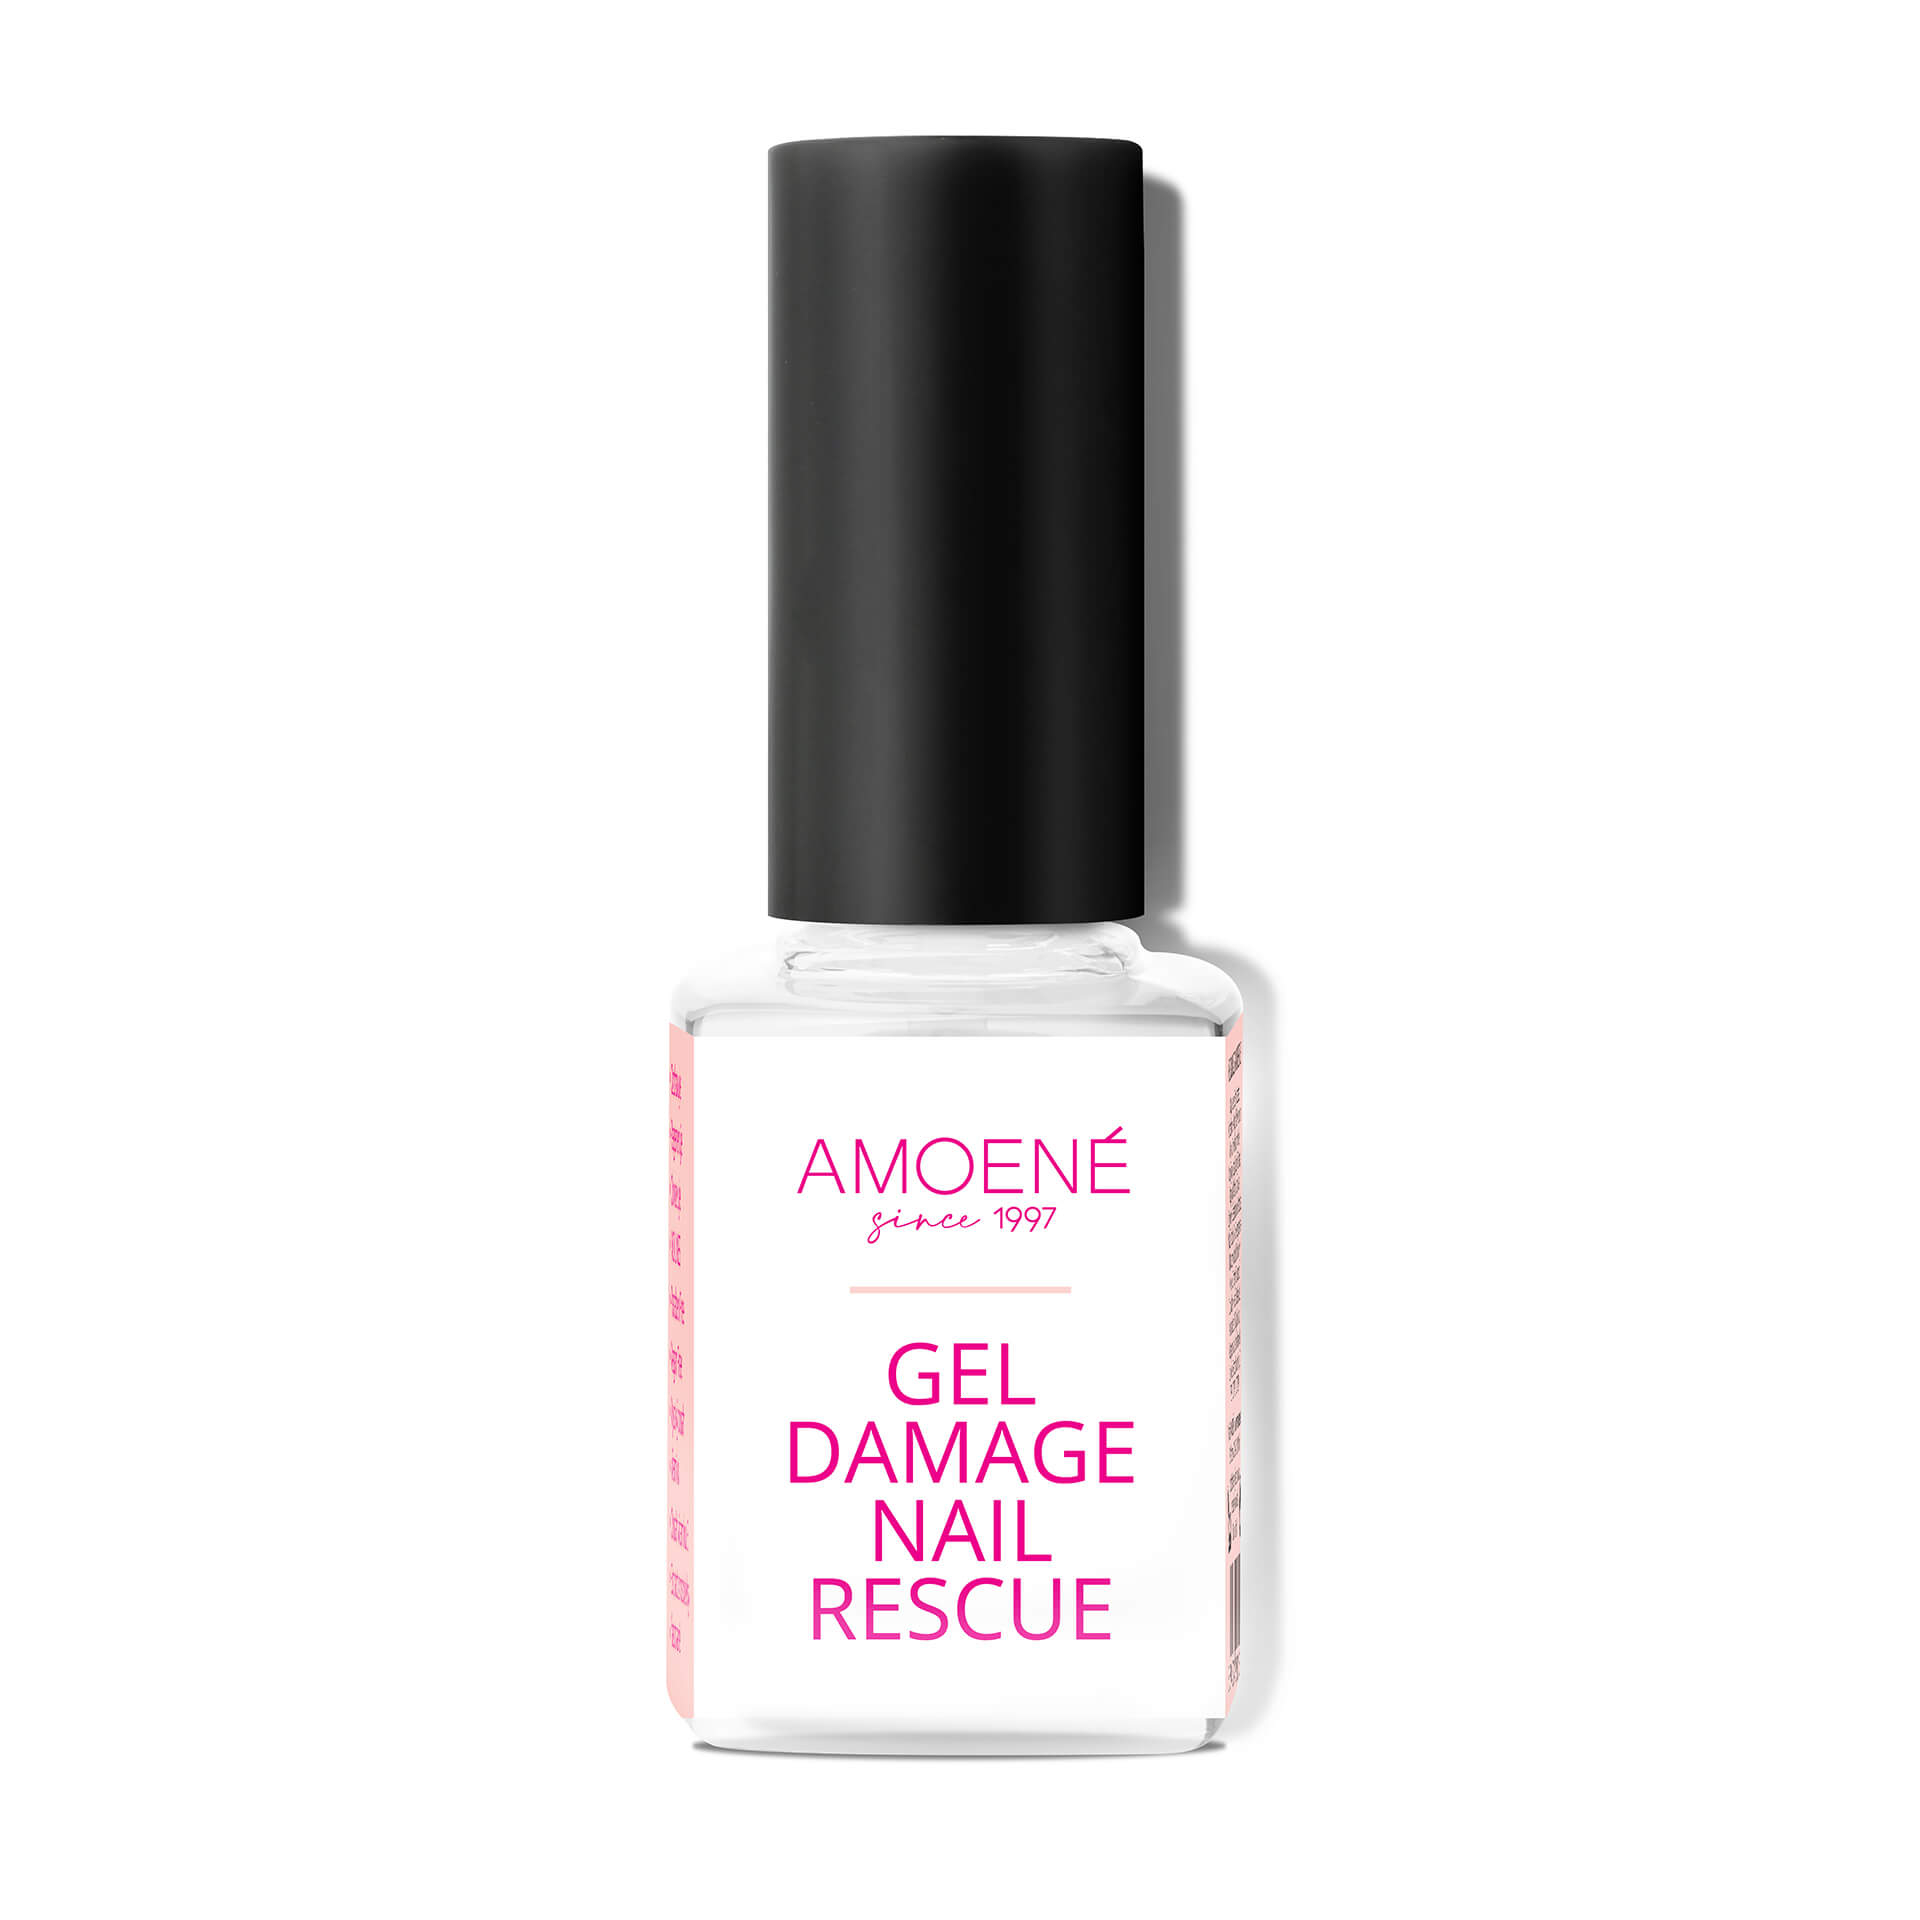 Amoené Gel dommages ongles secours 12 ml